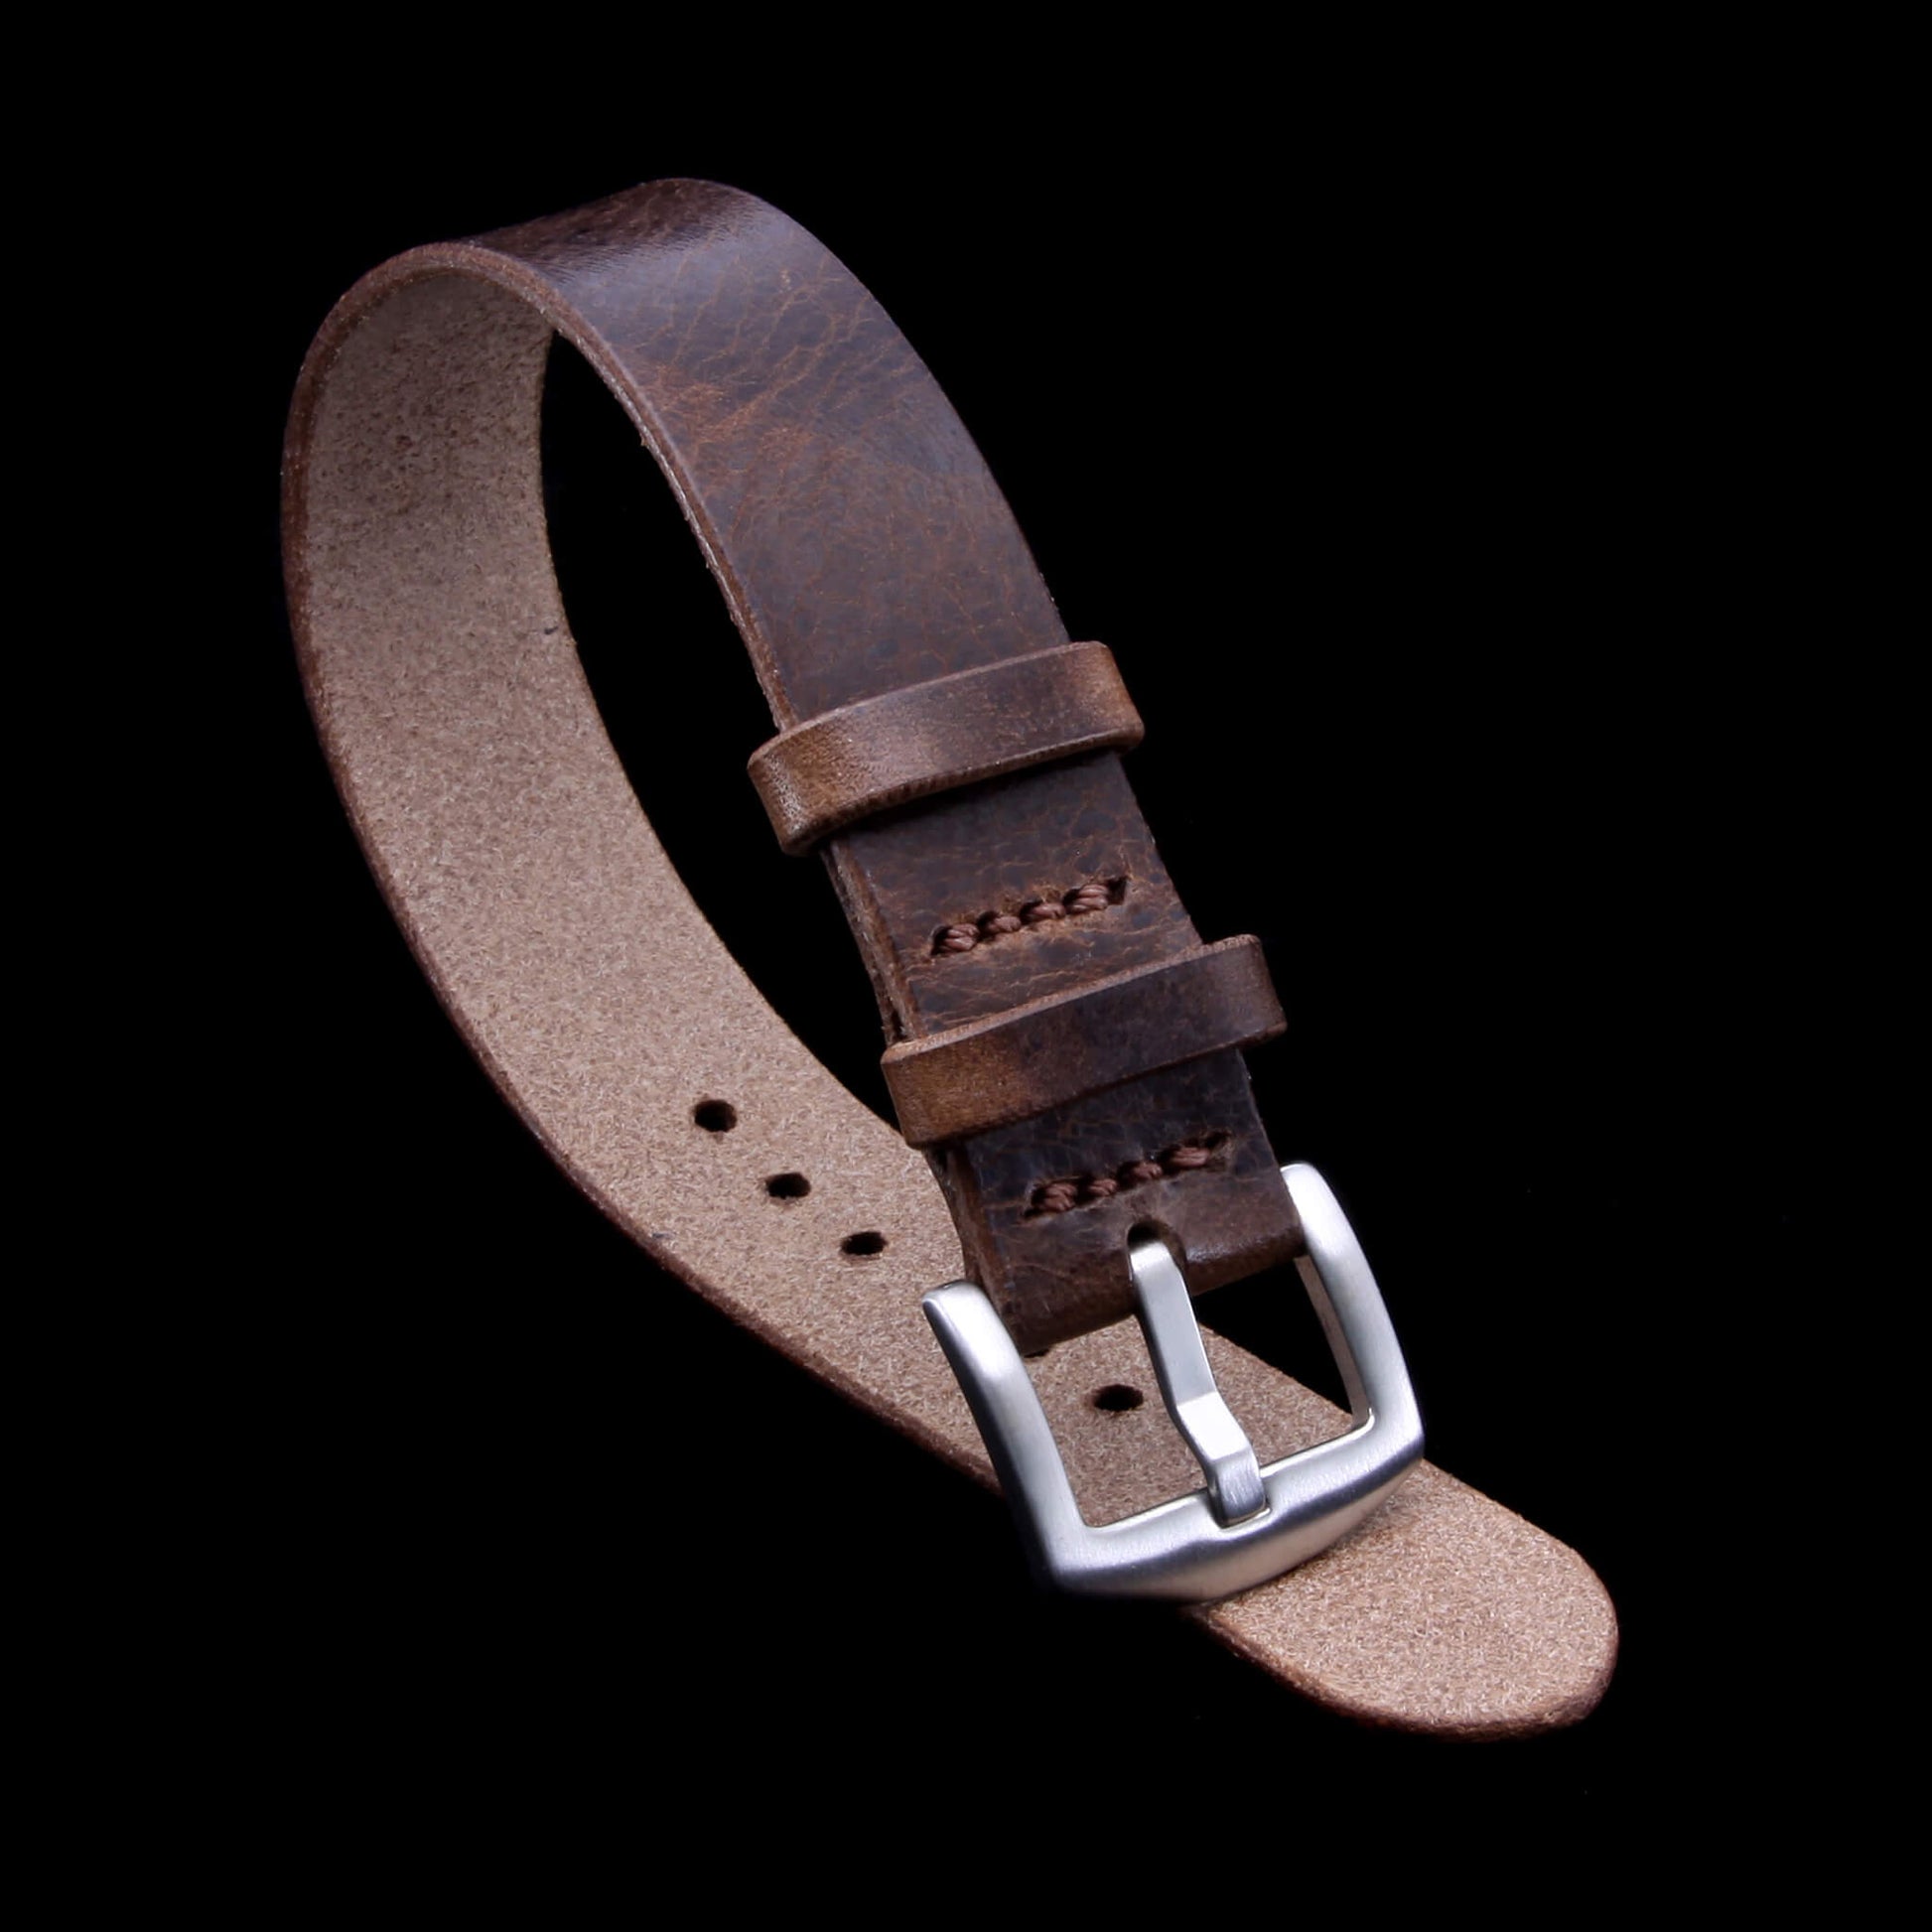 Single Pass Leather Watch Strap, 2-Keeper Military 103 | Full Grain Italian Vegetable-Tanned Leather | Cozy Handmade